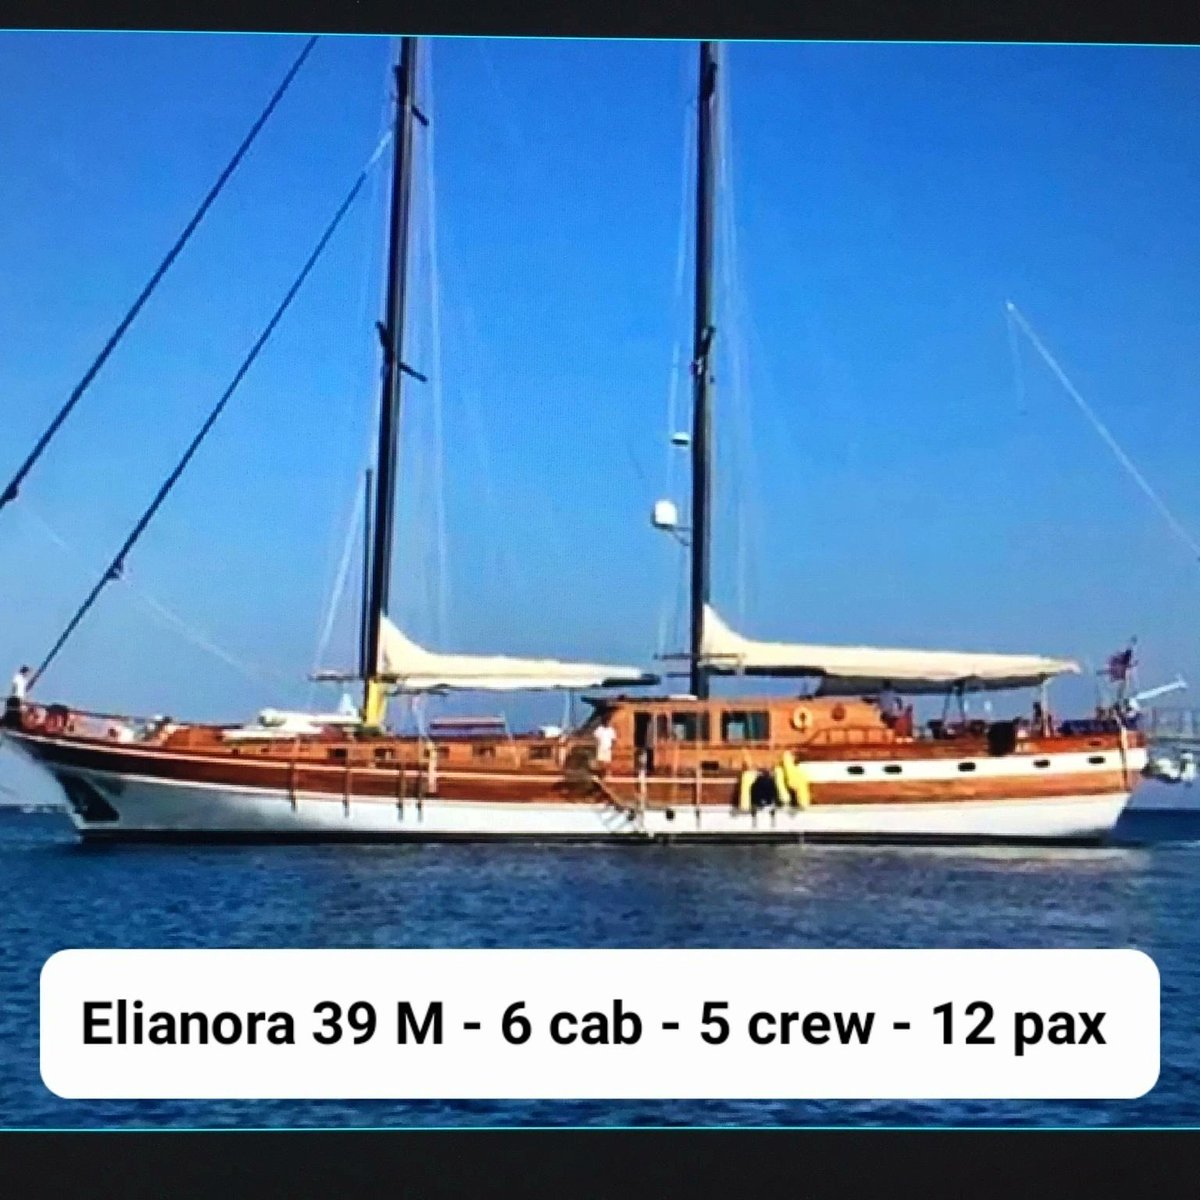 Luxury Yacht Charter Italy by Yacht Boutique Gulet Schooner Sailing Cruise MotorSailer Elianora & Victoria #yachtcharters #Yachts #holidays #boatrental #luxurytravel #luxury #travel #demol #vacation #bleisure #sailing #yachting #Eclipse #cruise #gntm #Election2024 #Amsterdam